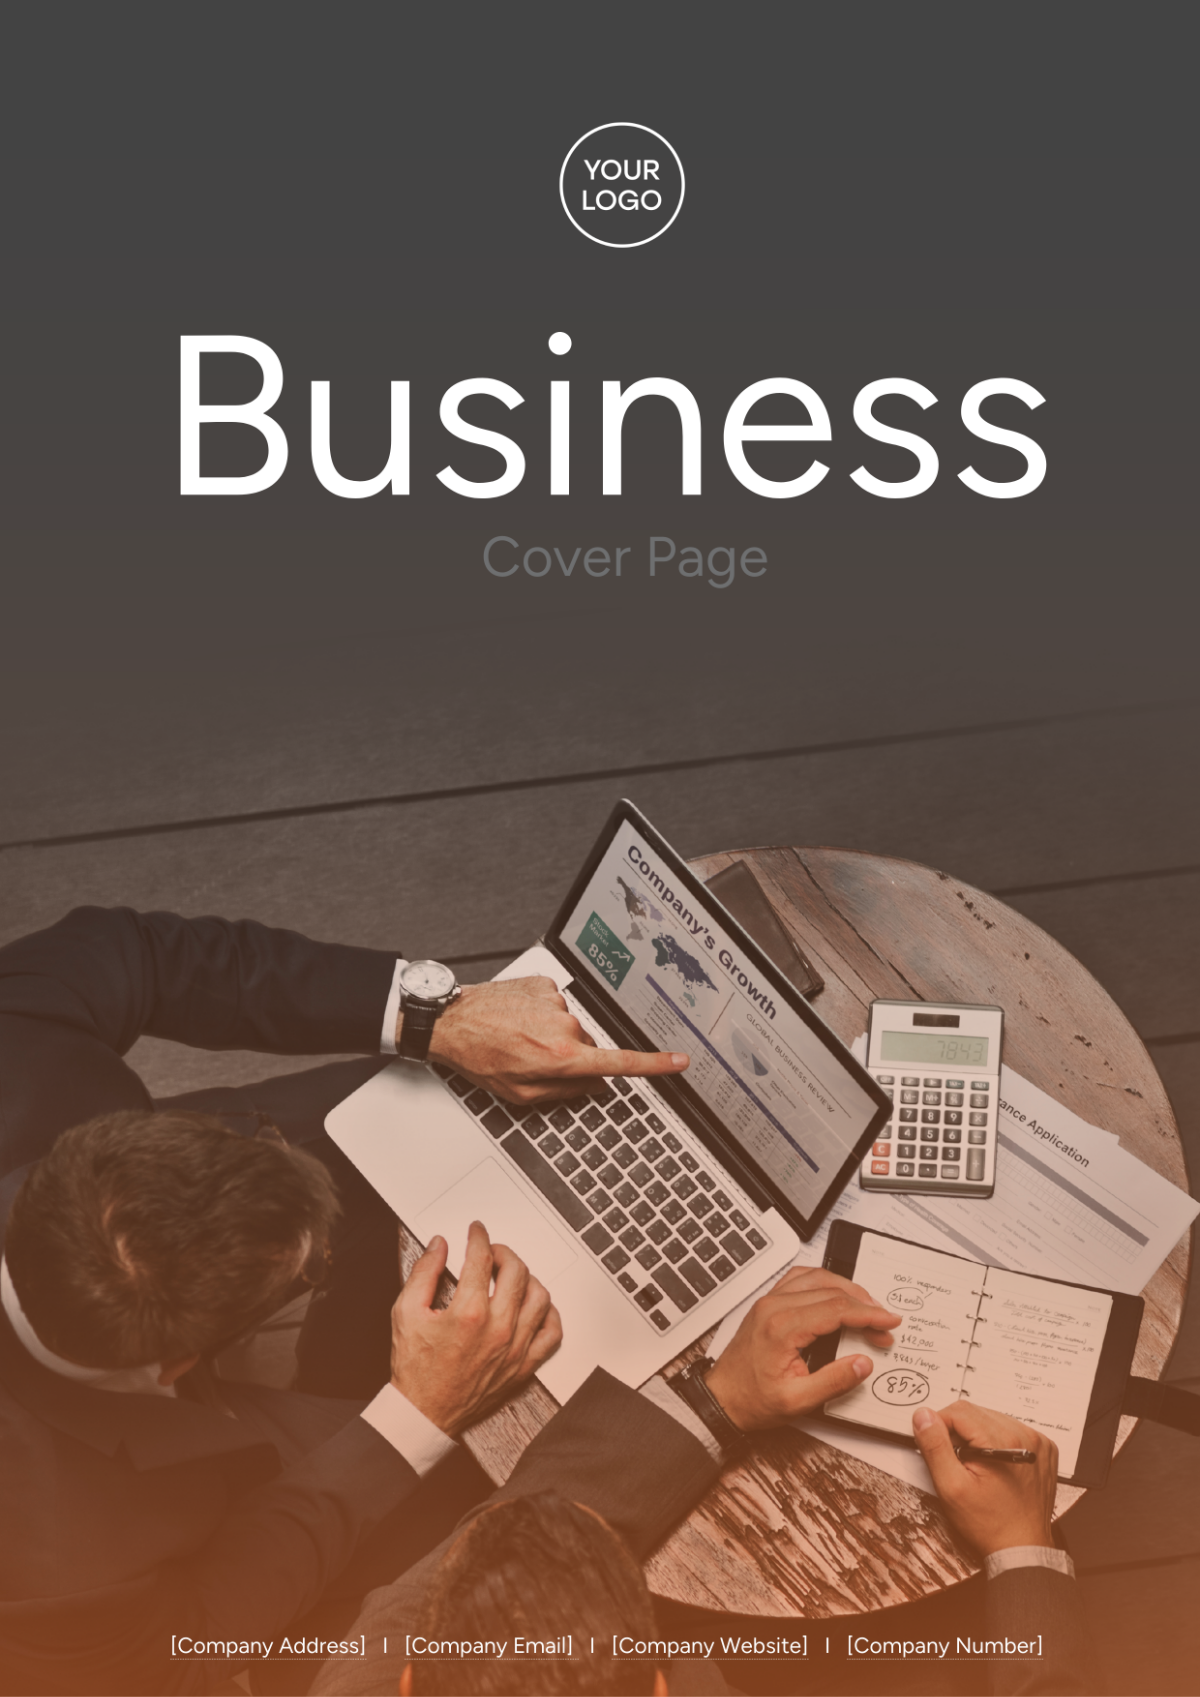 Free Business Cover Page Image Template